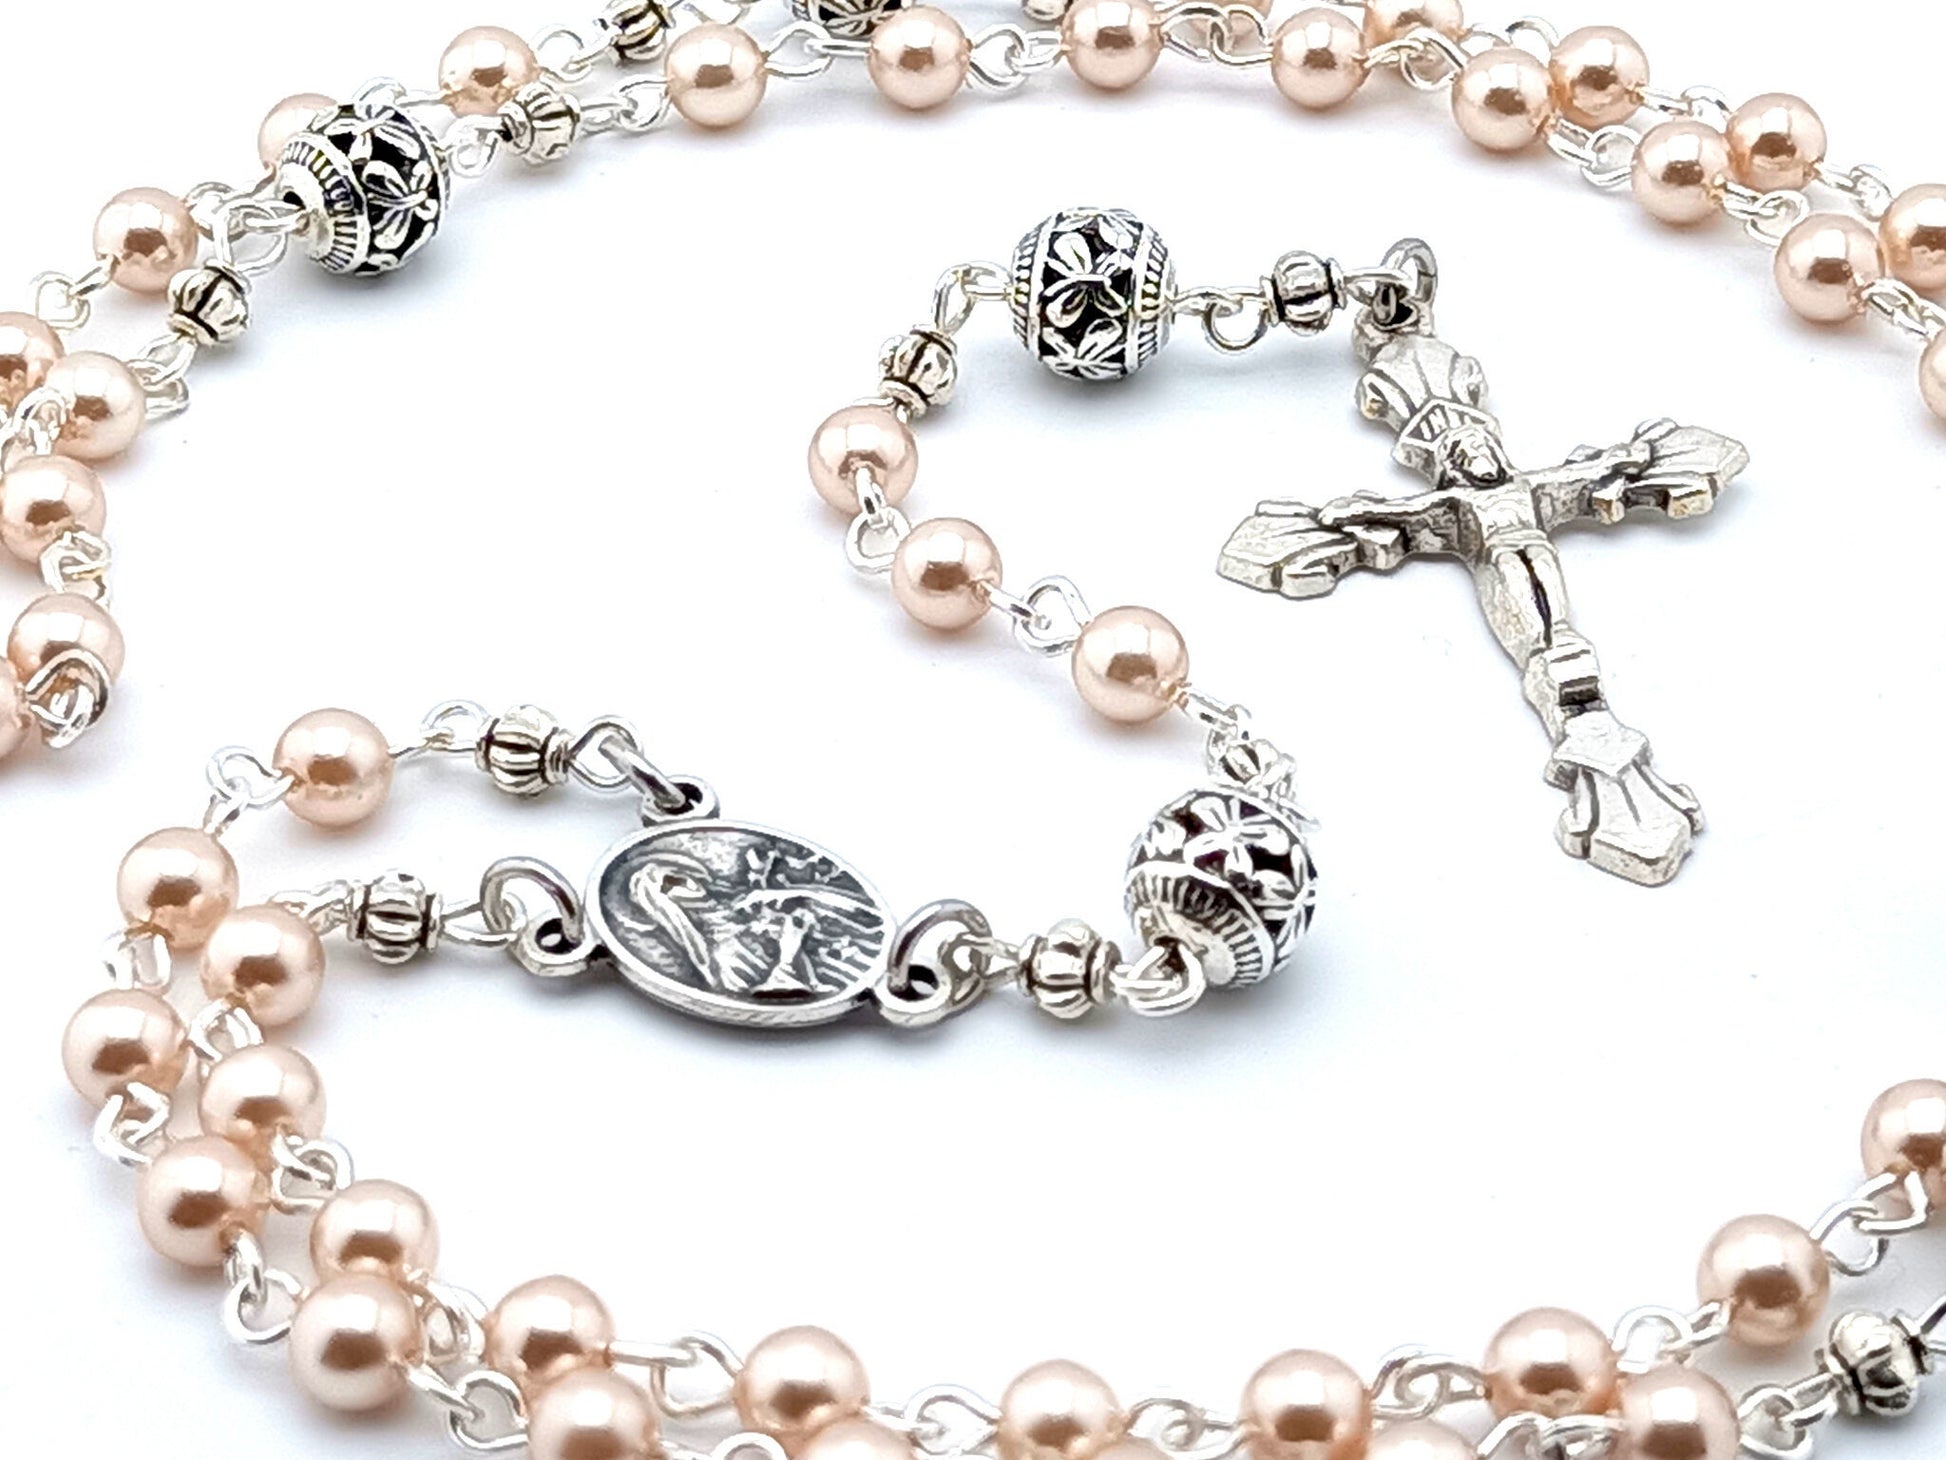 Saint Therese unique rosary beads with faux pearl beads, silver pater beads, crucifix and centre medal.